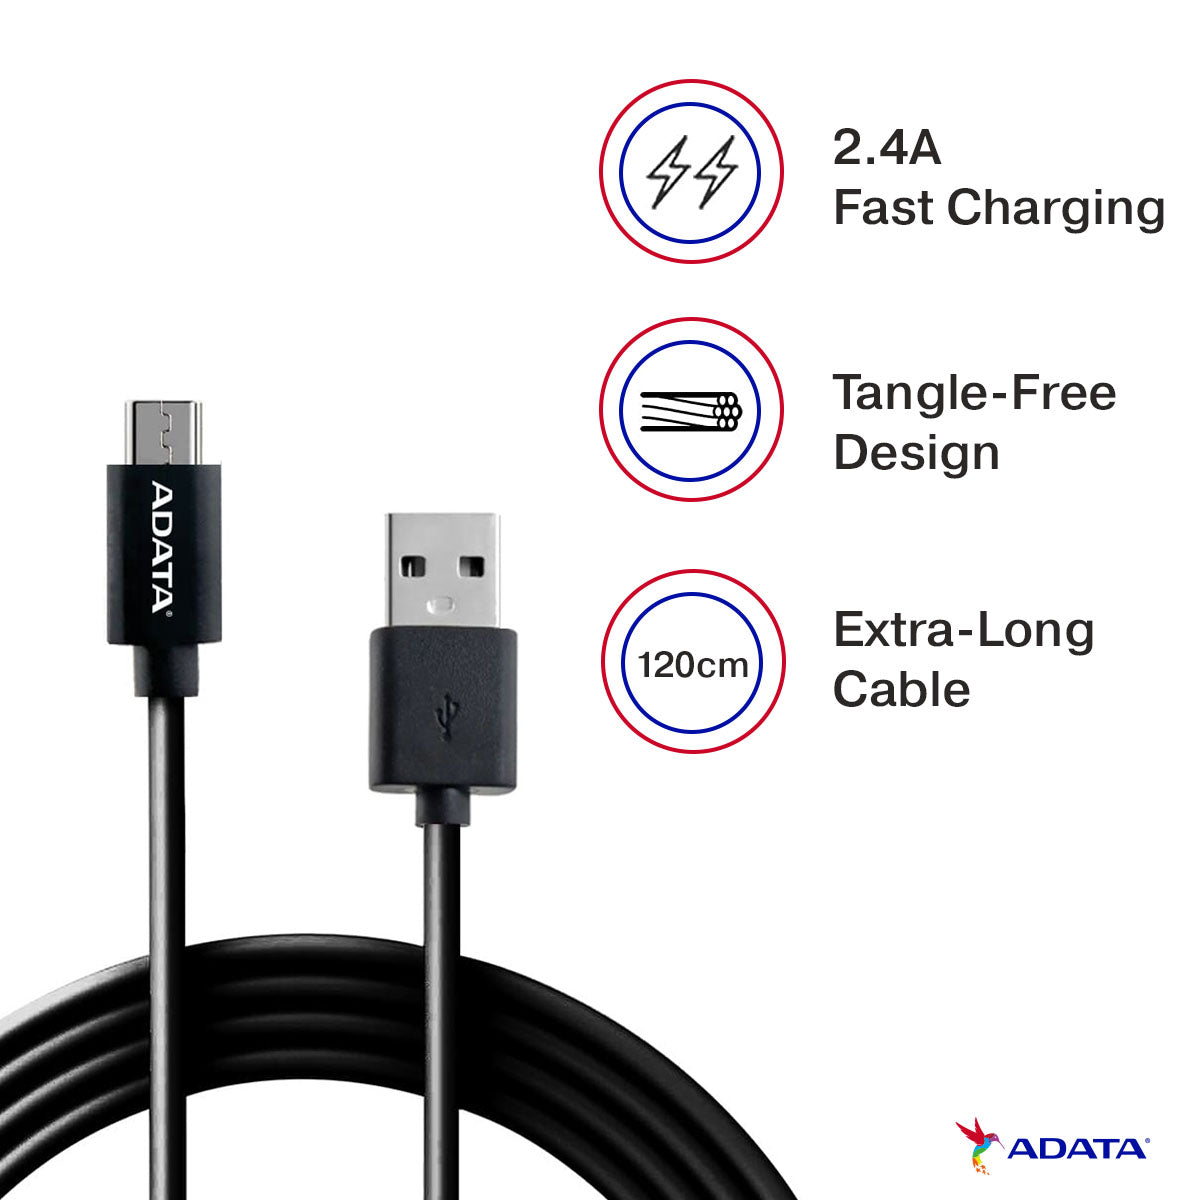 ADATA 2.4A Fast Charging Micro USB SYNC & Charge Cable with Reversible Design - Black